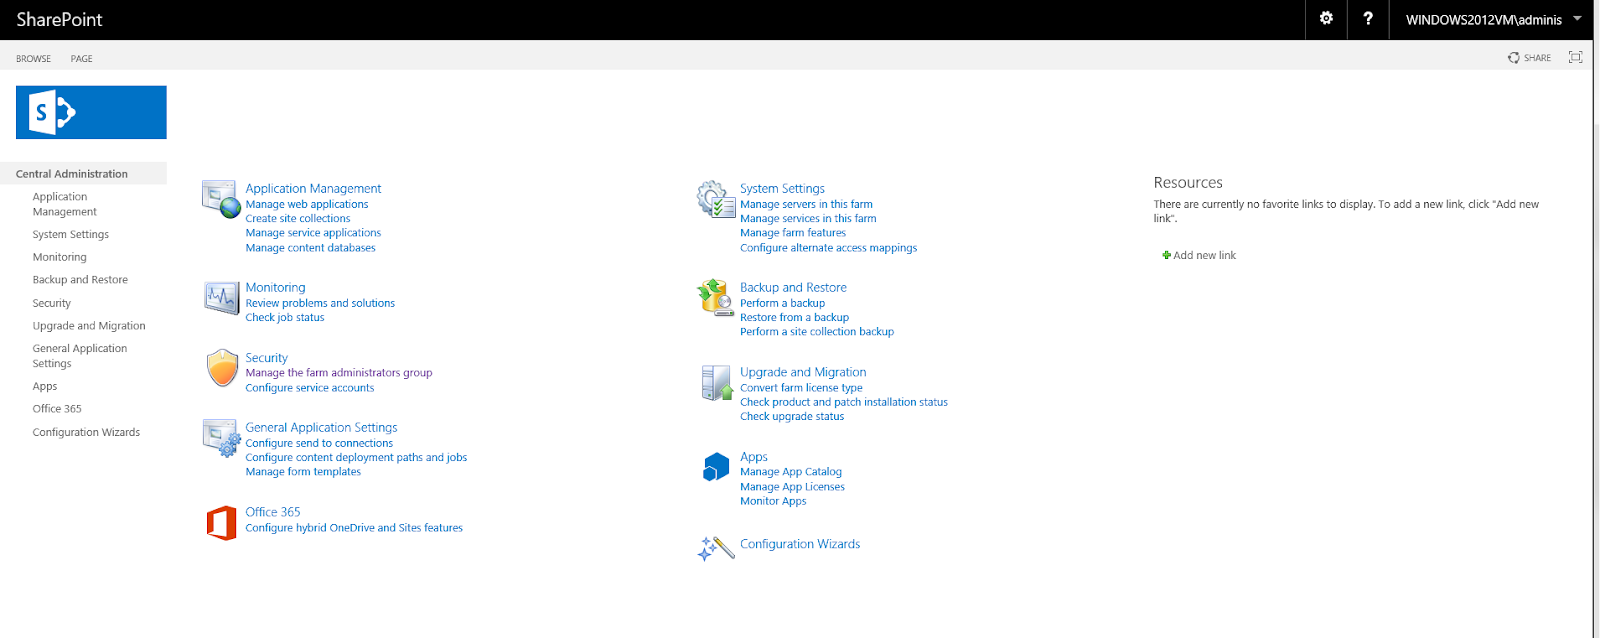 SharePoint installation successfully completed.